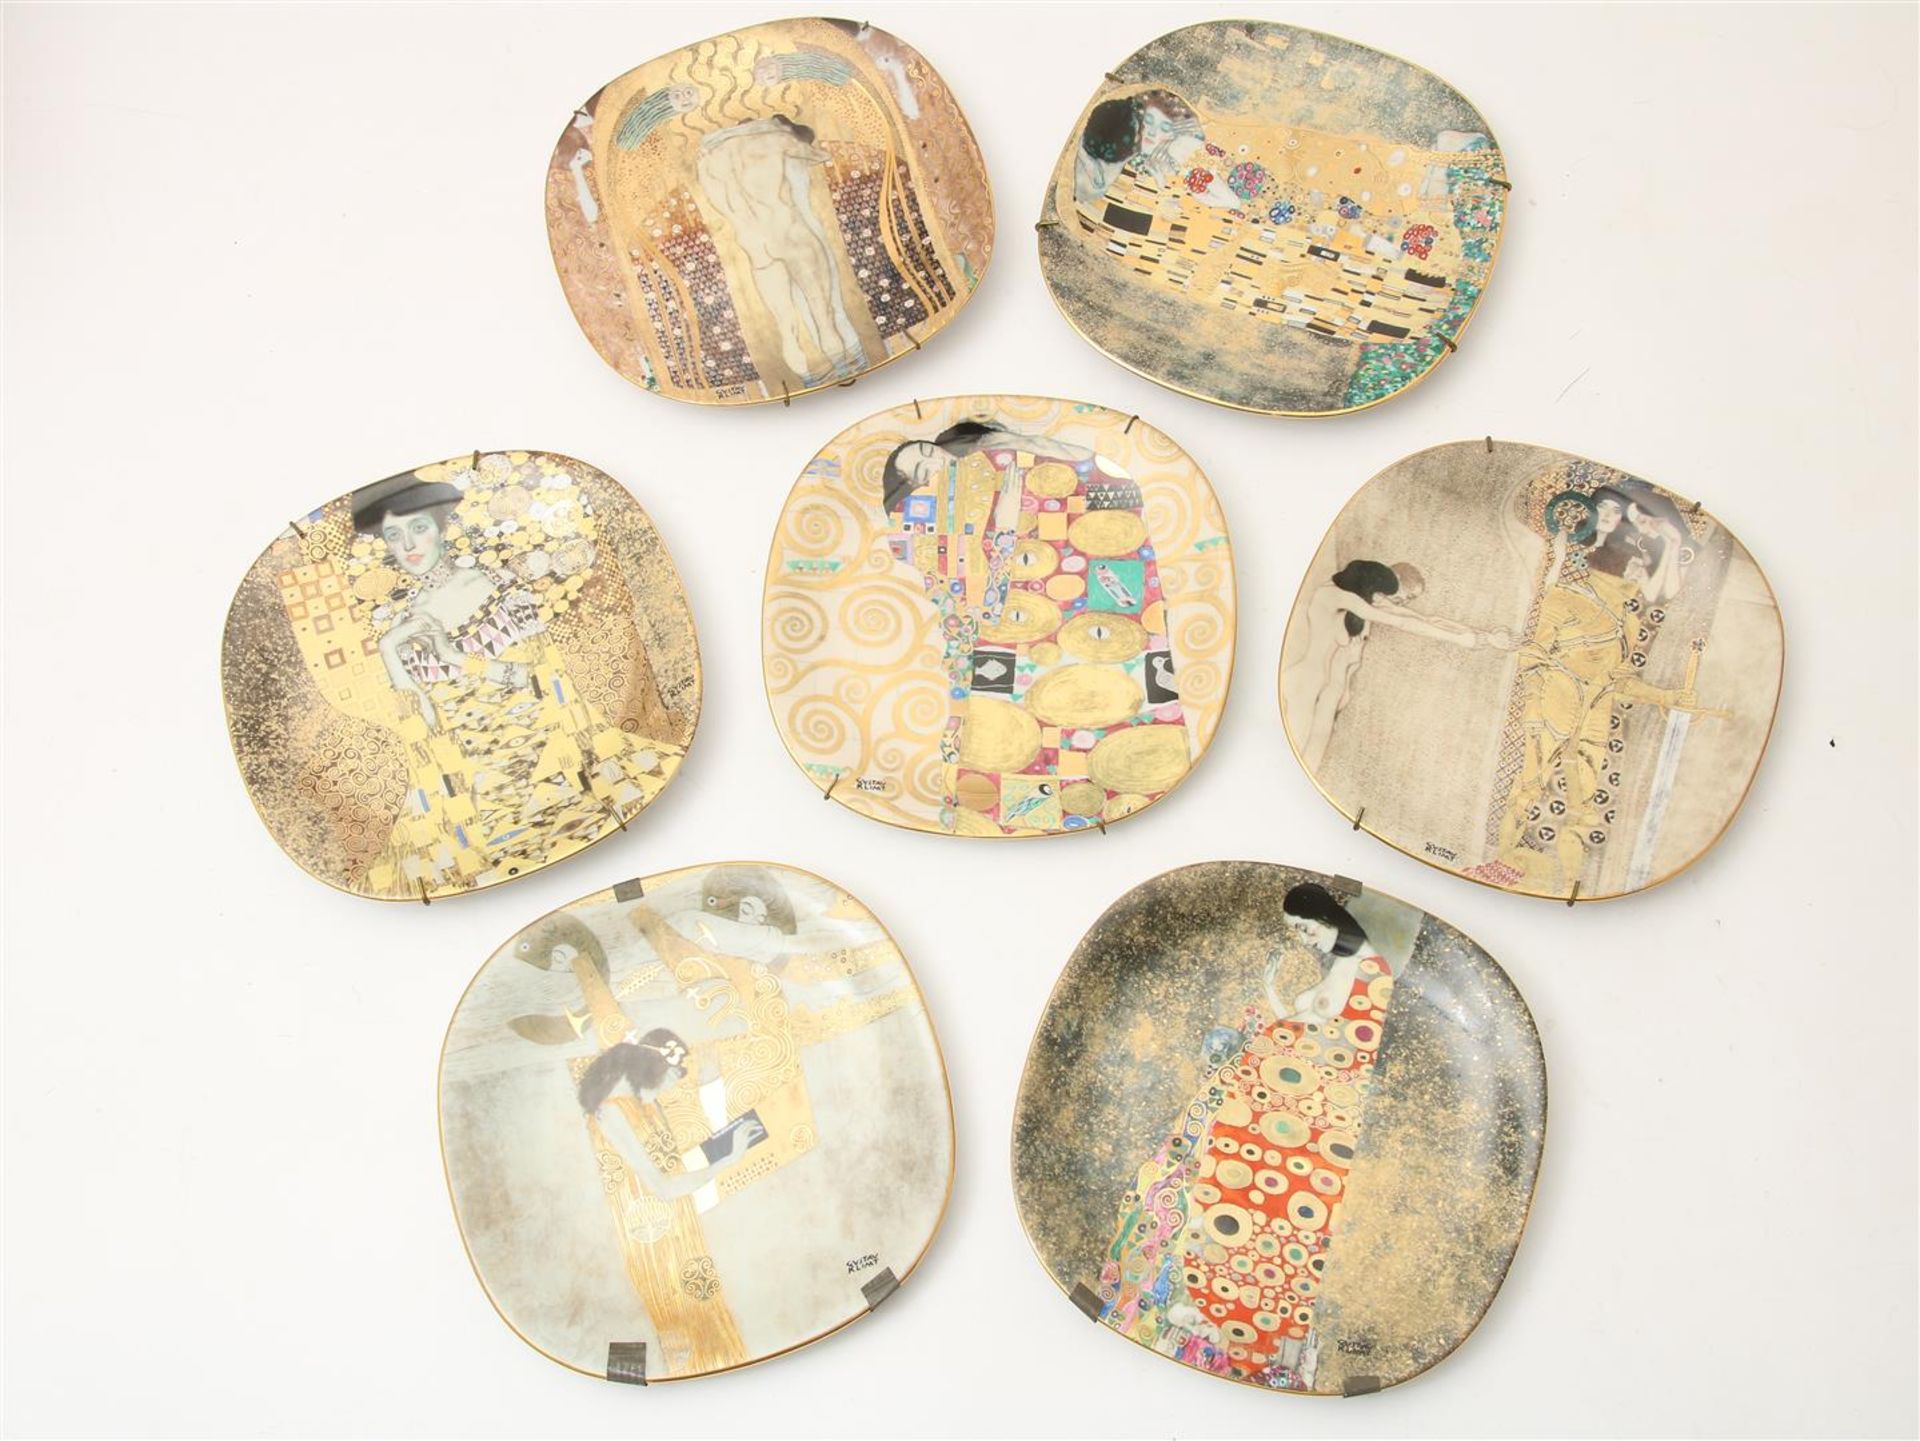 Series of 7 plates with images of the painter Gustav Klimt, Lilien porzellan, "Phantastic